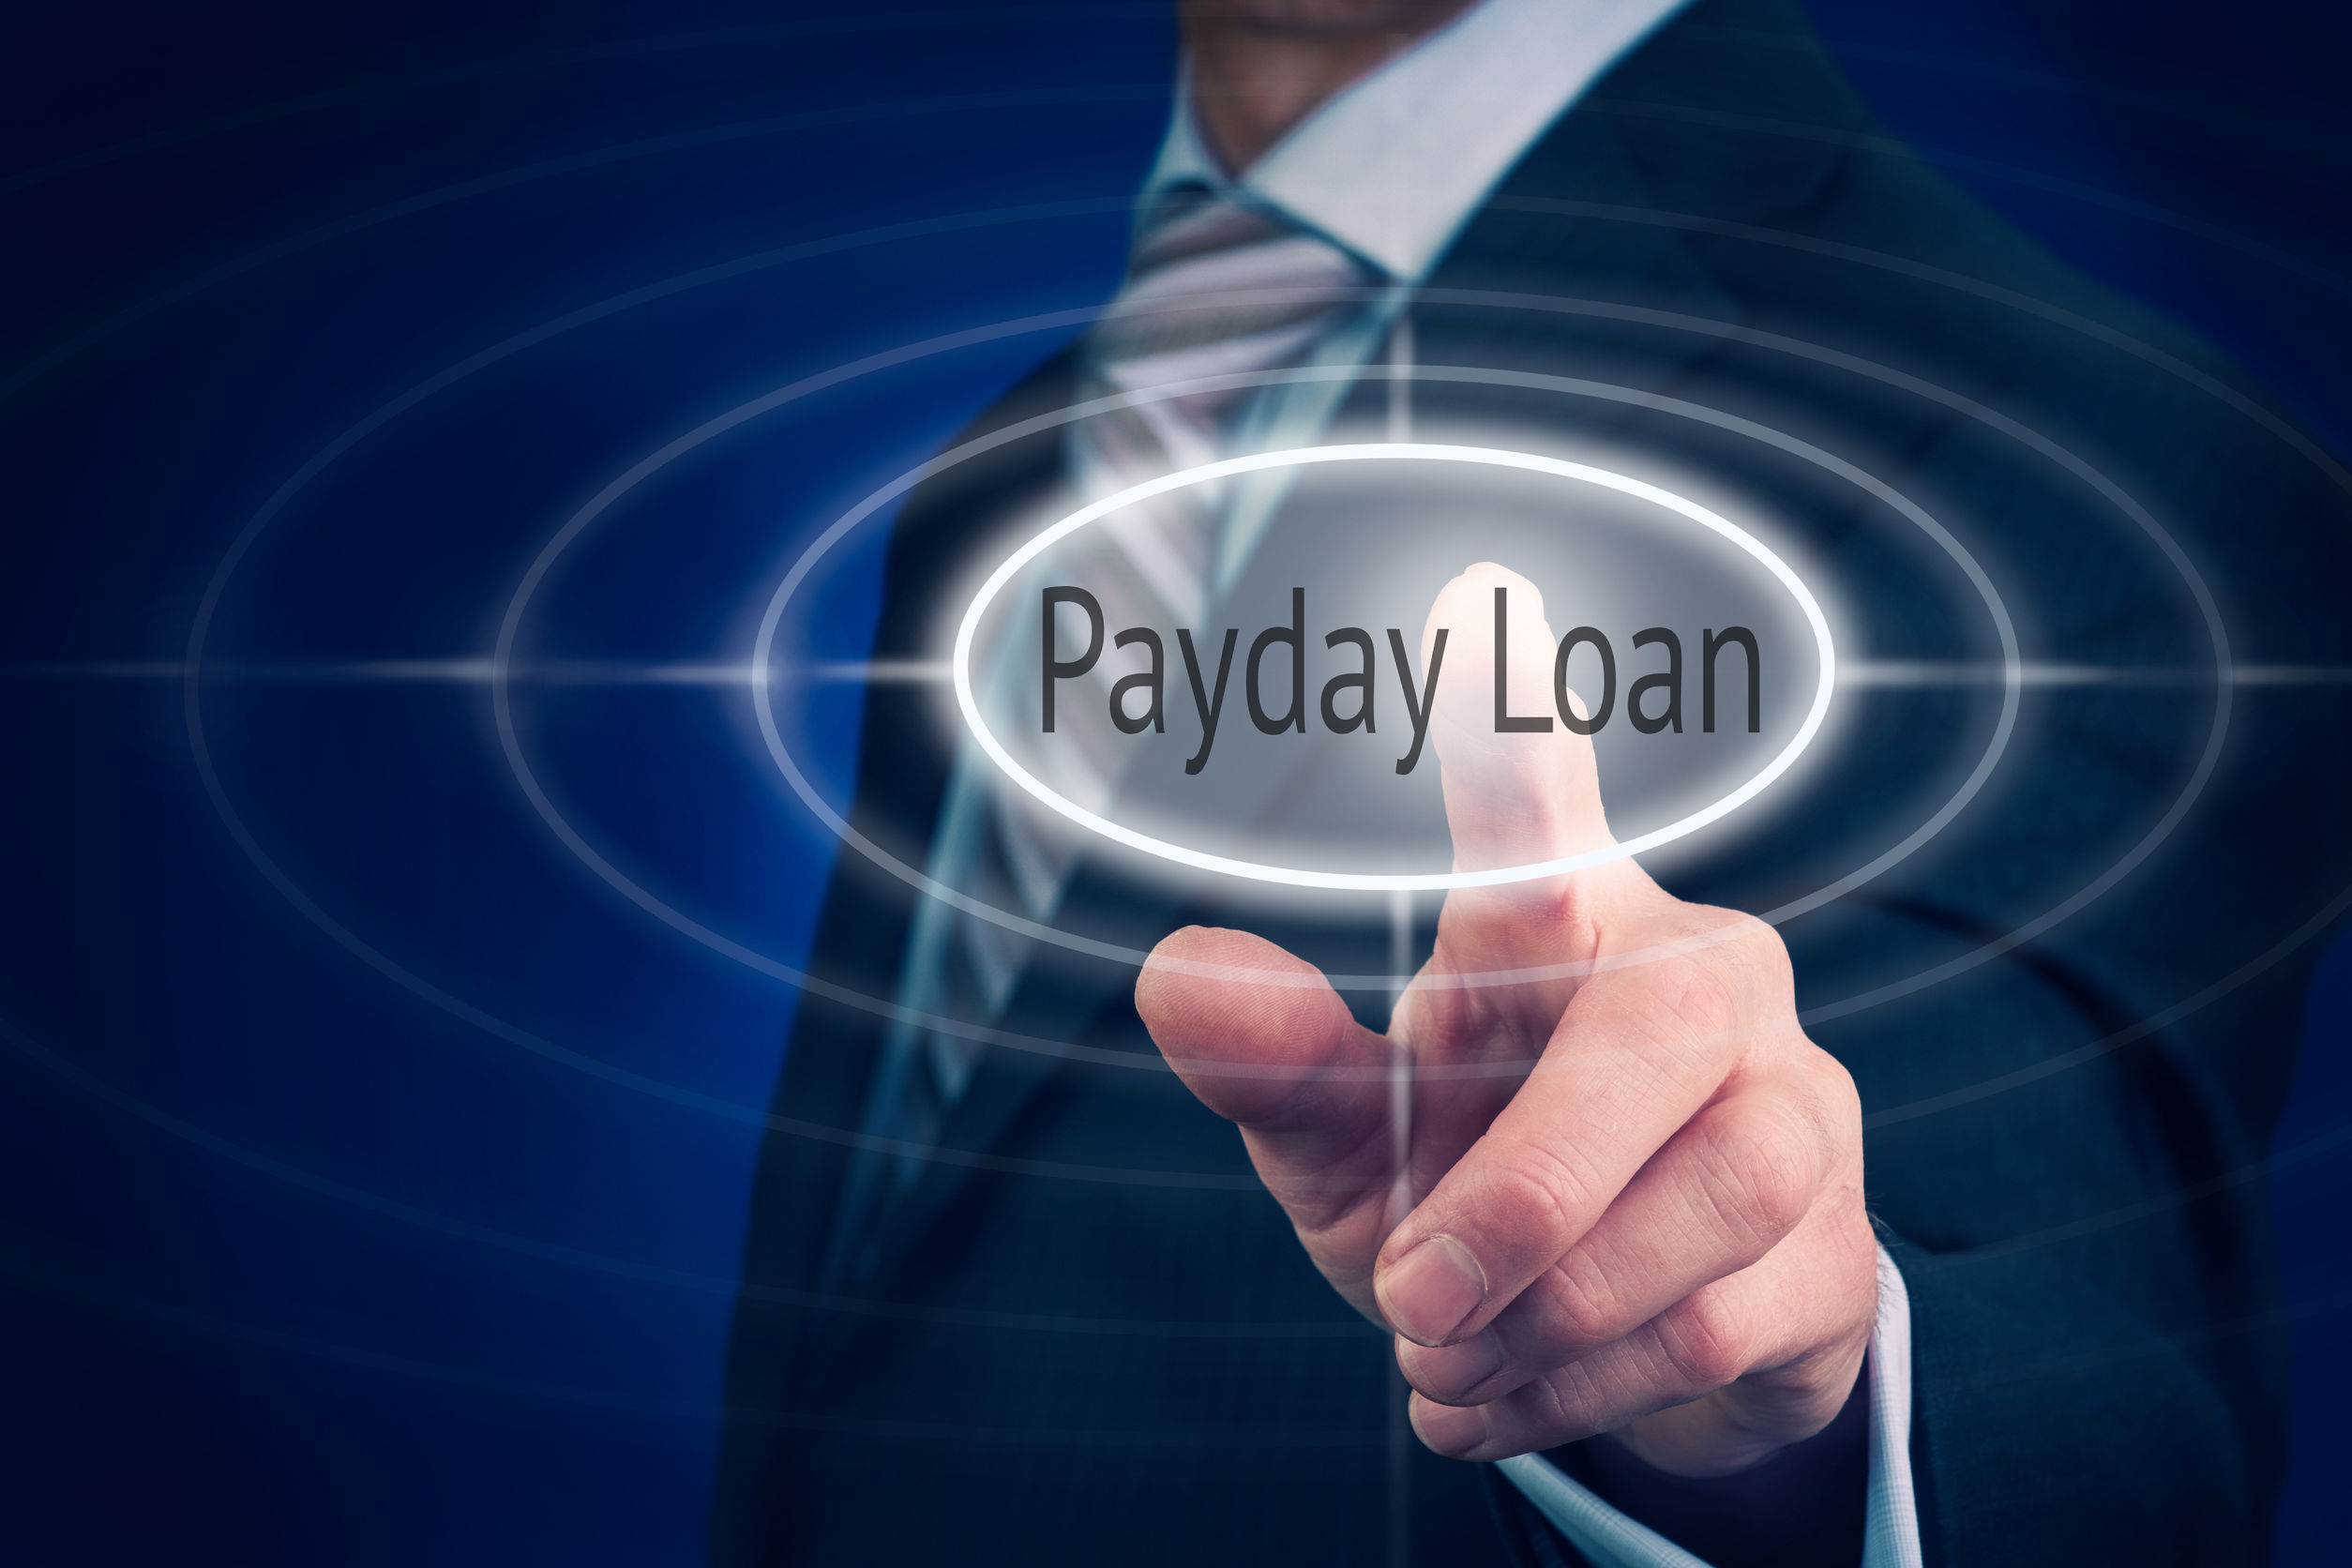 3 Important Things to Remember about Payday Loans